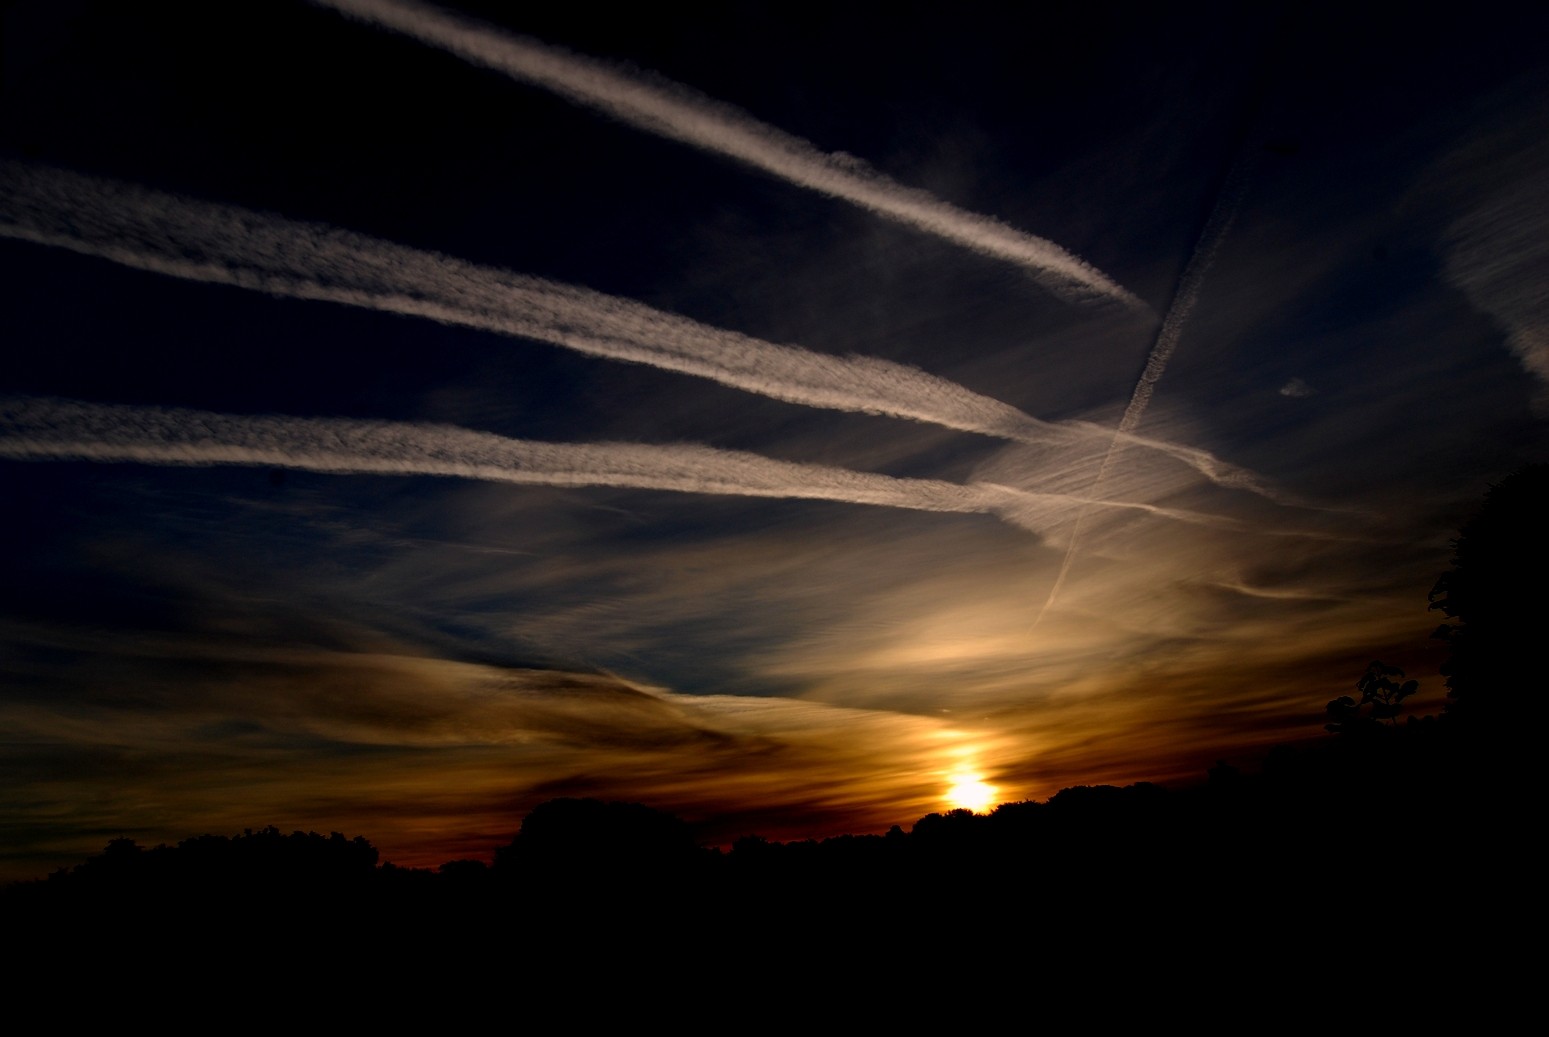 Early morning contrails